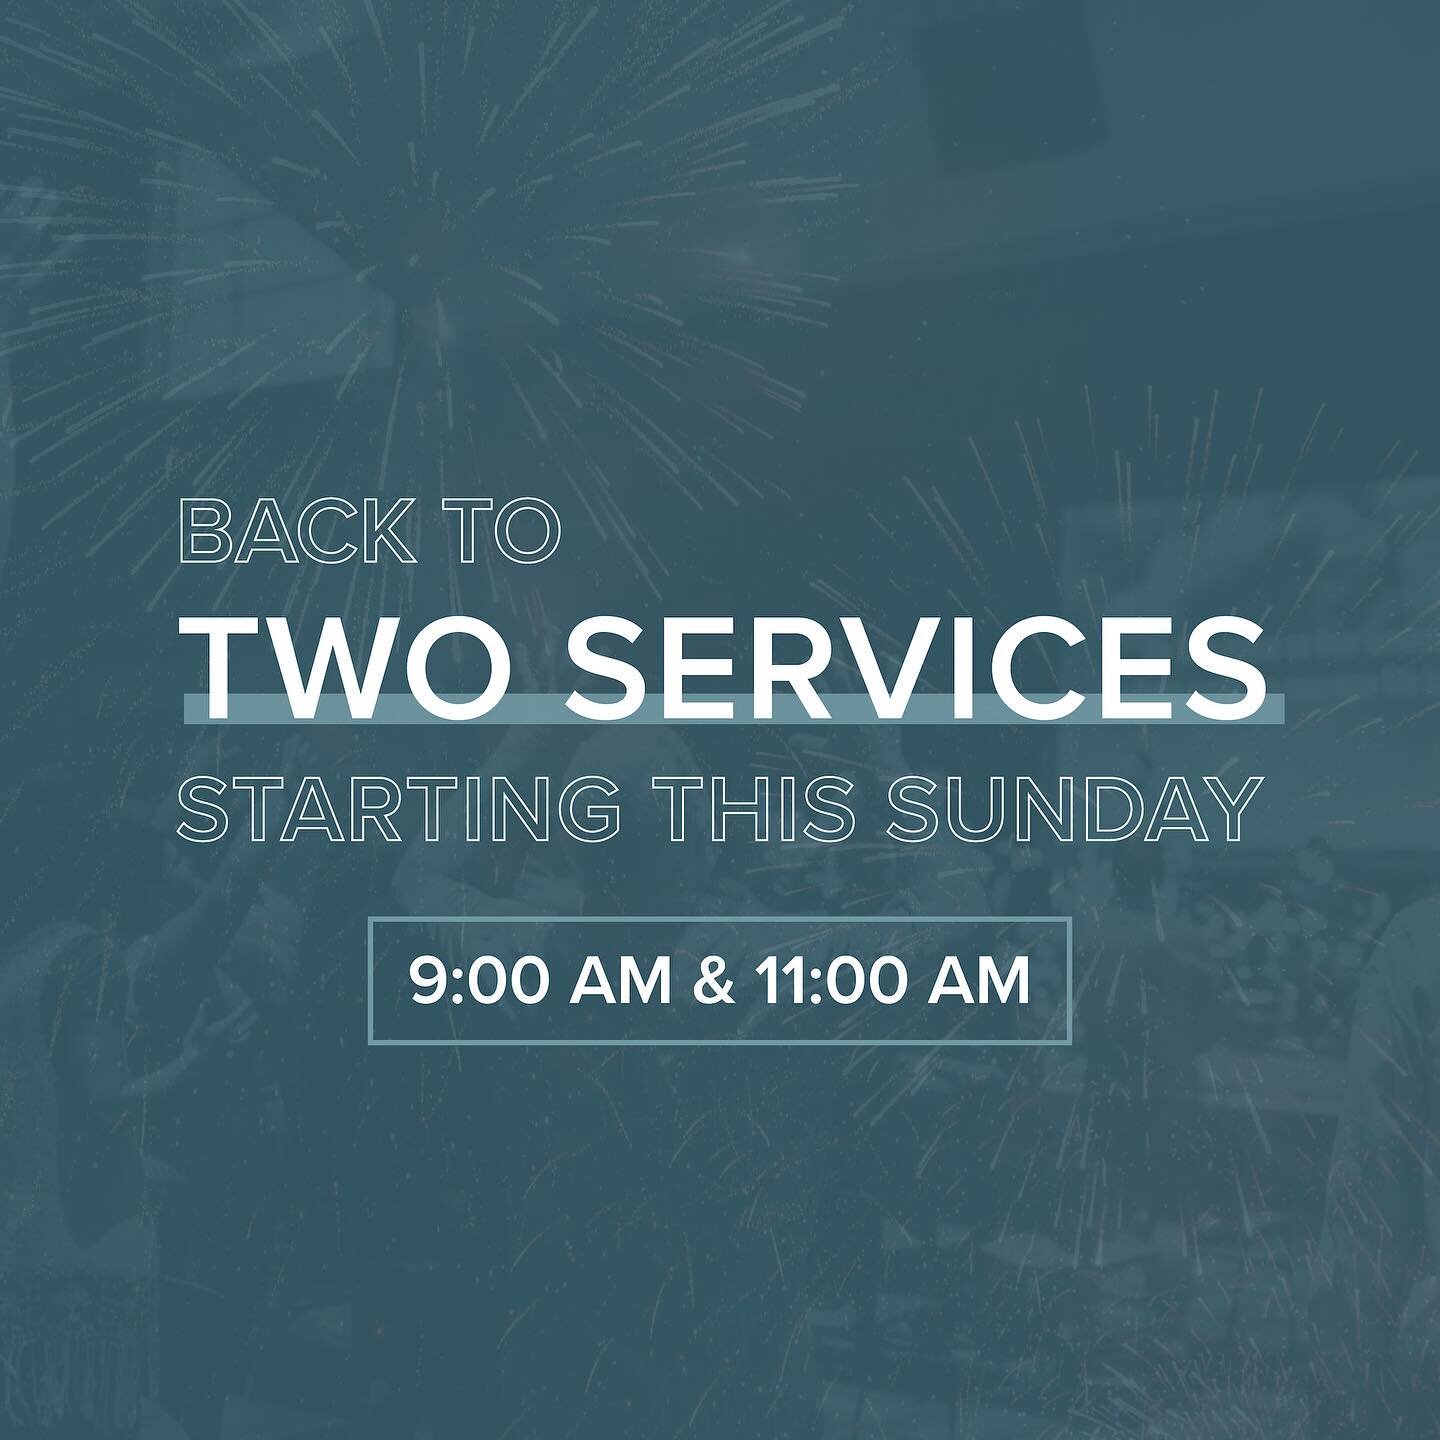 We&rsquo;re going back to two services on Sunday mornings starting this weekend! Join us at 9:00 and 11:00 AM!